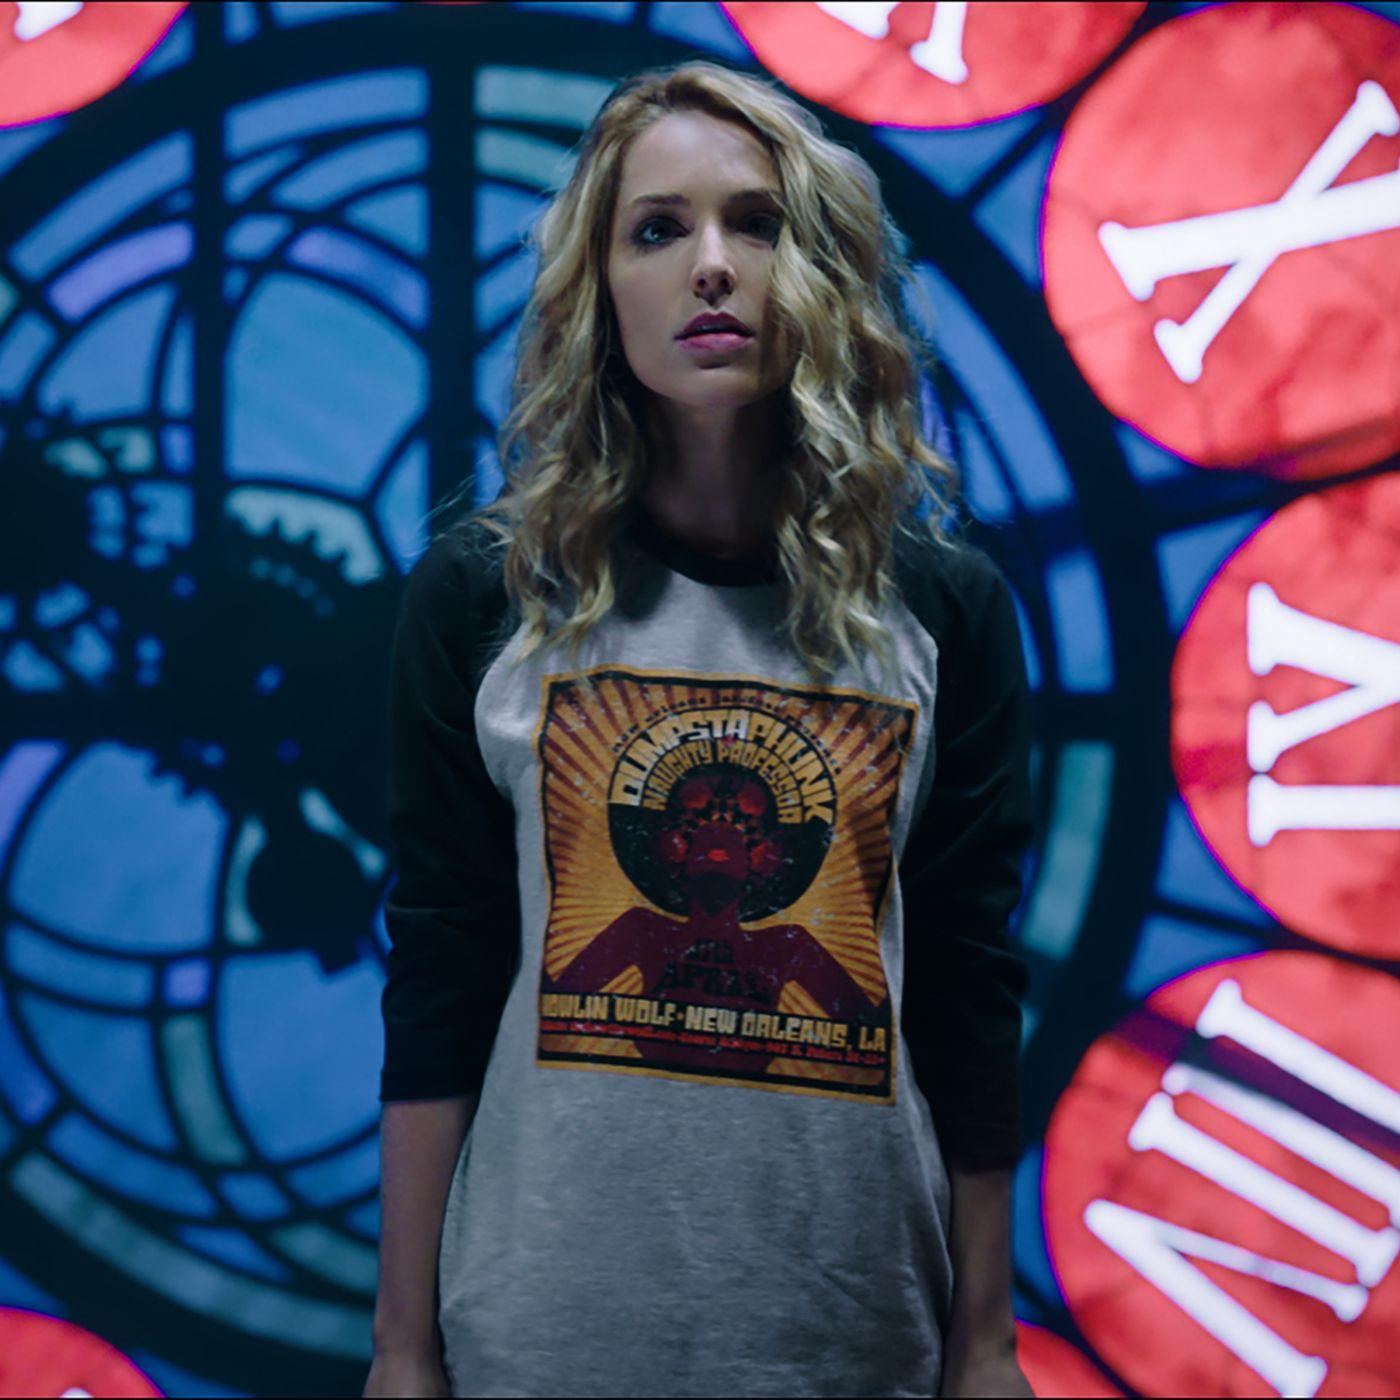 Happy Death Day 2U's after credits scene teases future